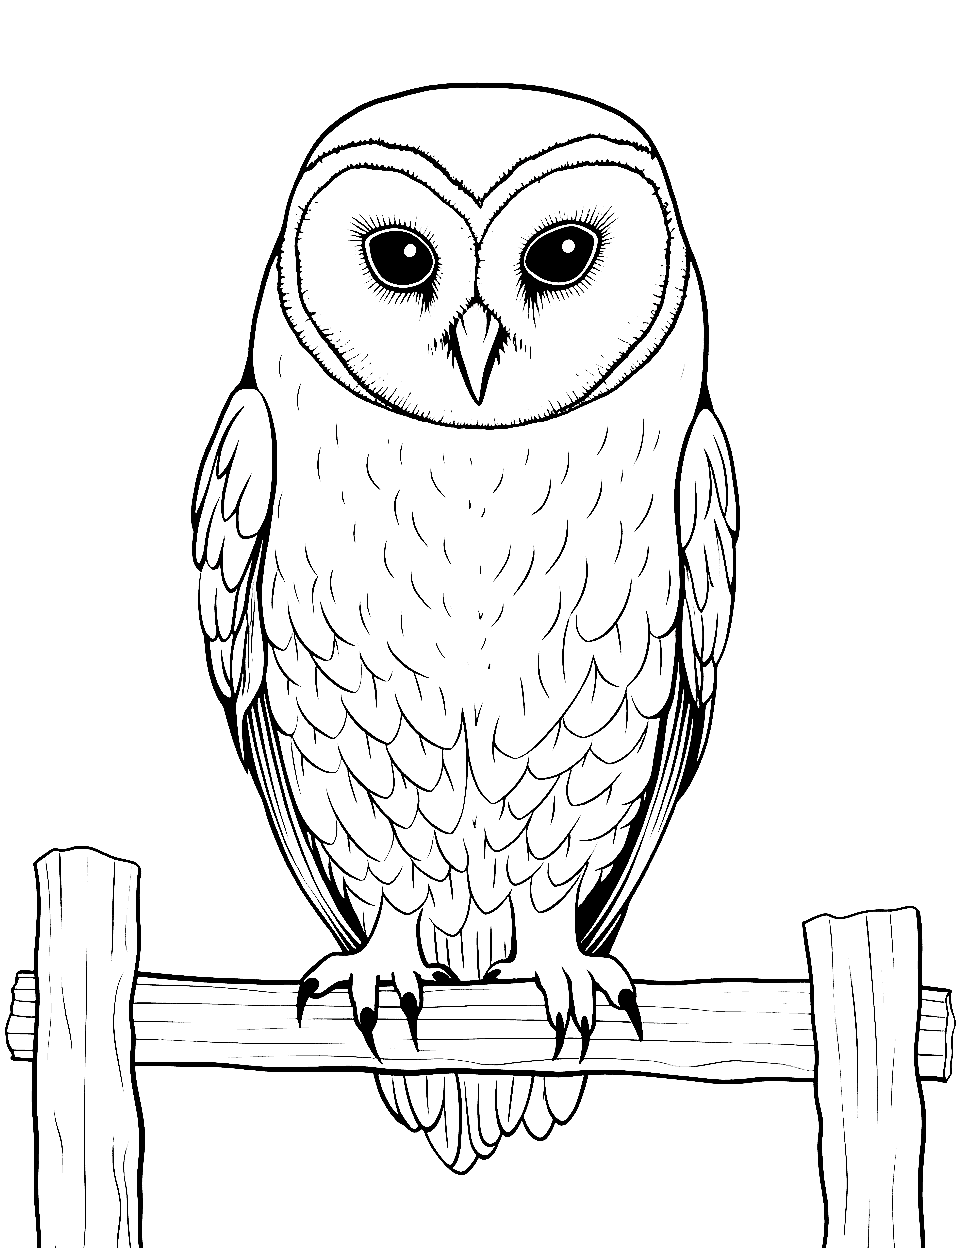 Realistic Barn Owl Coloring Page - A detailed barn owl perched on a fence post with intricate feather patterns.